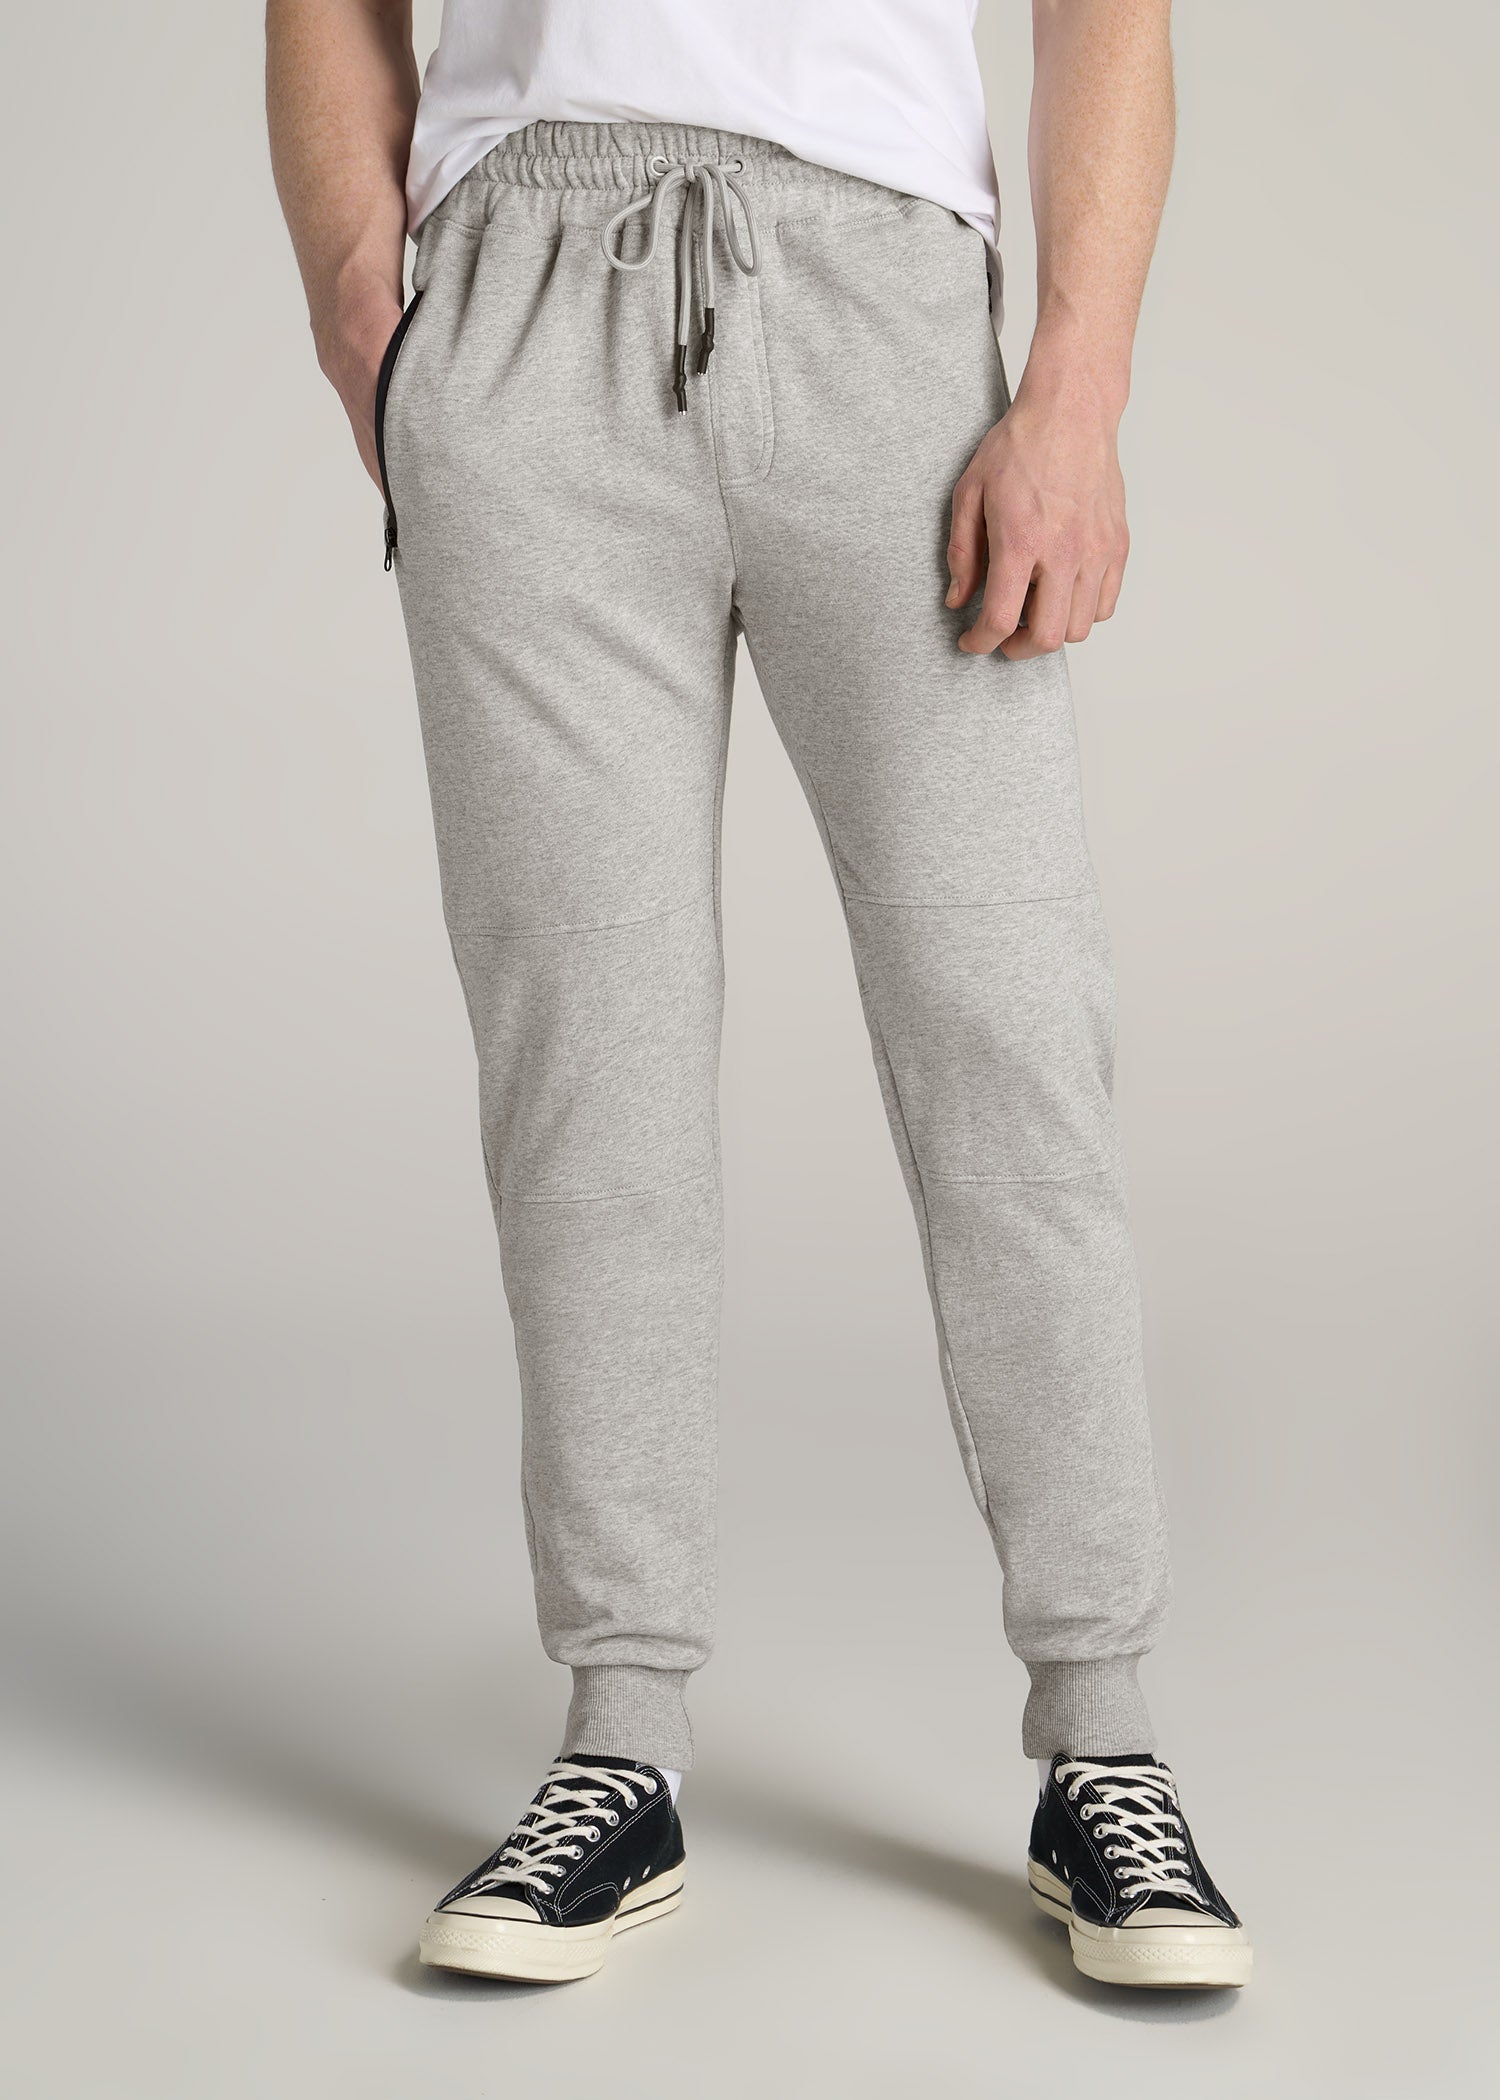 25% off Sweatpants and Joggers